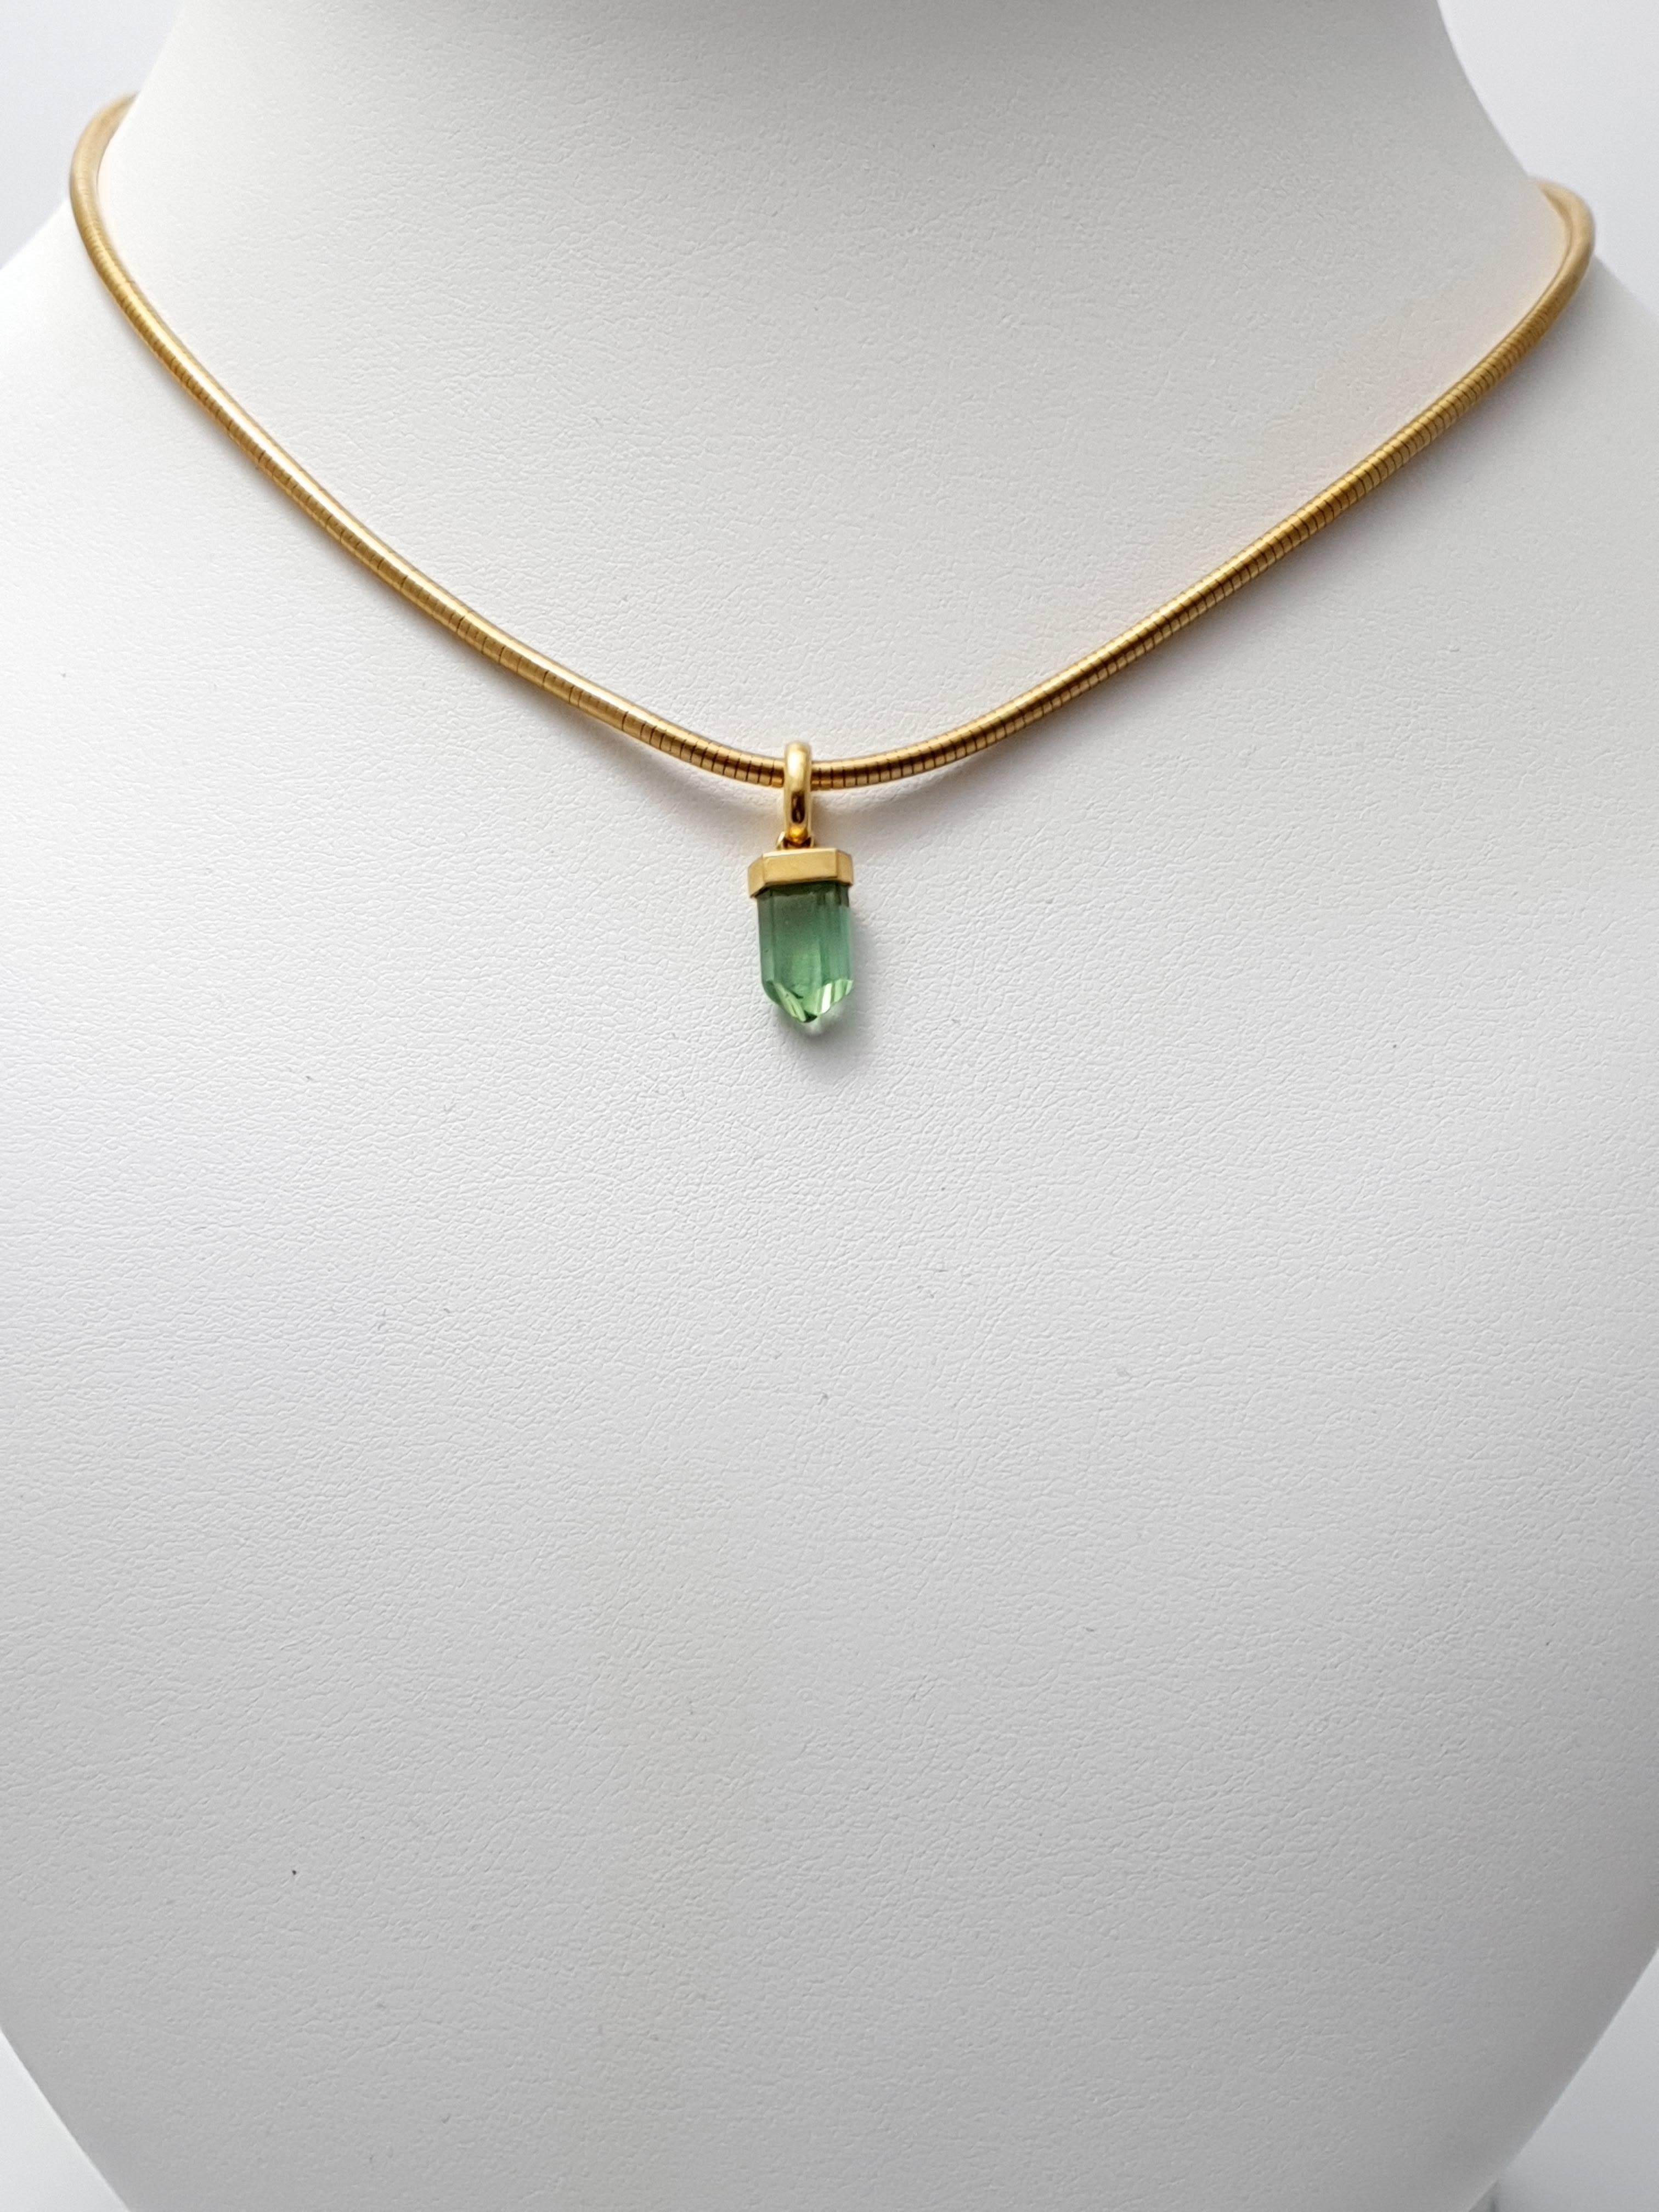 Green Tourmaline Crystal Beaded Pendant with 18 Carat Yellow Gold Snake Chain In New Condition For Sale In Kirschweiler, DE